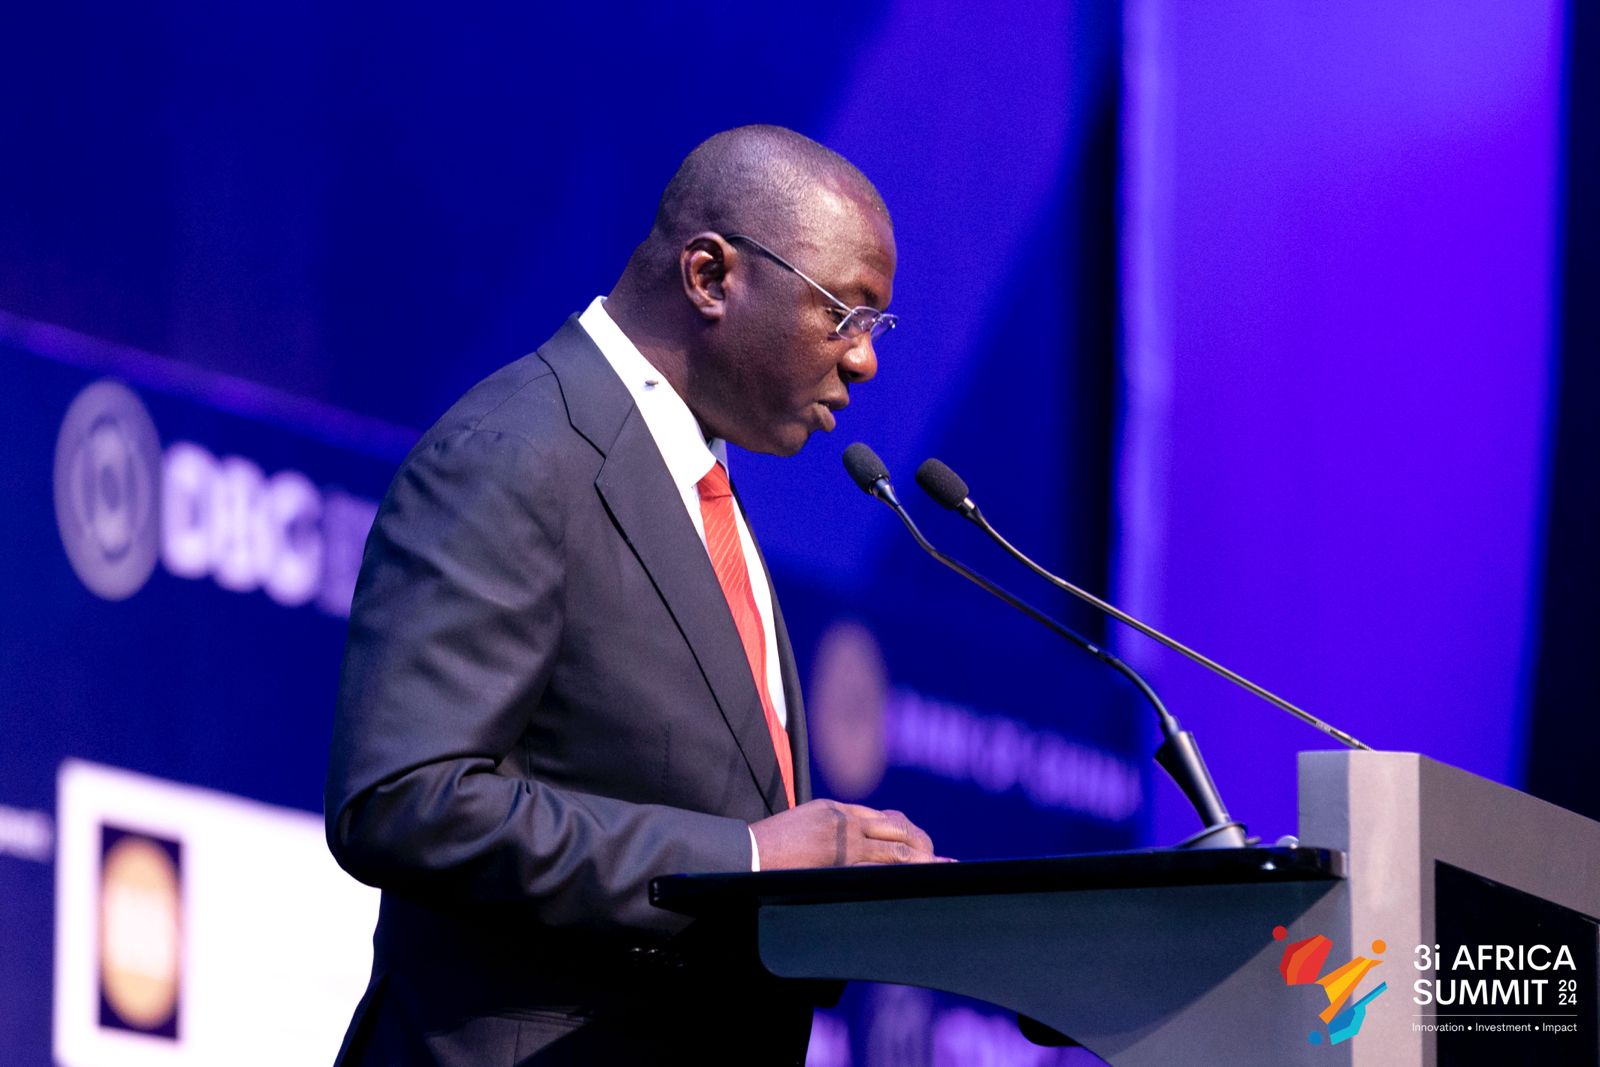 The cedi will stabilise after completion of debt exchange – Finance Minister